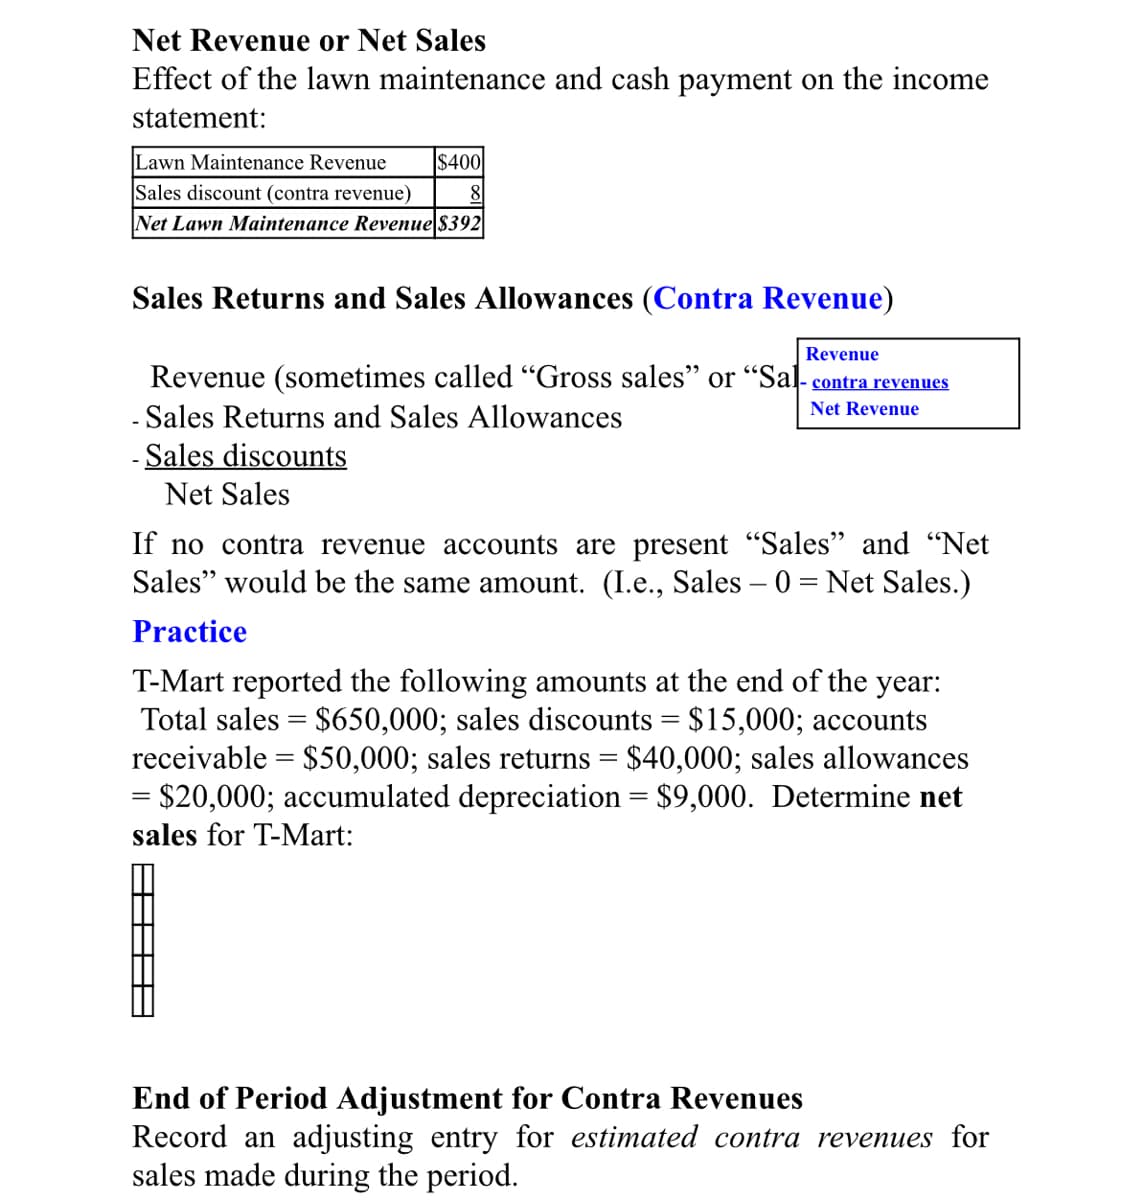 Net Revenue or Net Sales
Effect of the lawn maintenance and cash payment on the income
statement:
Lawn Maintenance Revenue
Sales discount (contra revenue)
Net Lawn Maintenance Revenue $392
$400
8|
Sales Returns and Sales Allowances (Contra Revenue)
Revenue
Revenue (sometimes called "Gross sales" or “Sal- contra revenues
Net Revenue
Sales Returns and Sales Allowances
- Sales discounts
Net Sales
If no contra revenue accounts are present "Sales" and "Net
Sales" would be the same amount. (I.e., Sales – 0 = Net Sales.)
Practice
T-Mart reported the following amounts at the end of the year:
Total sales = $650,000; sales discounts = $15,000; accounts
receivable = $50,000; sales returns = $40,000; sales allowances
= $20,000; accumulated depreciation = $9,000. Determine net
sales for T-Mart:
End of Period Adjustment for Contra Revenues
Record an adjusting entry for estimated contra revenues for
sales made during the period.
